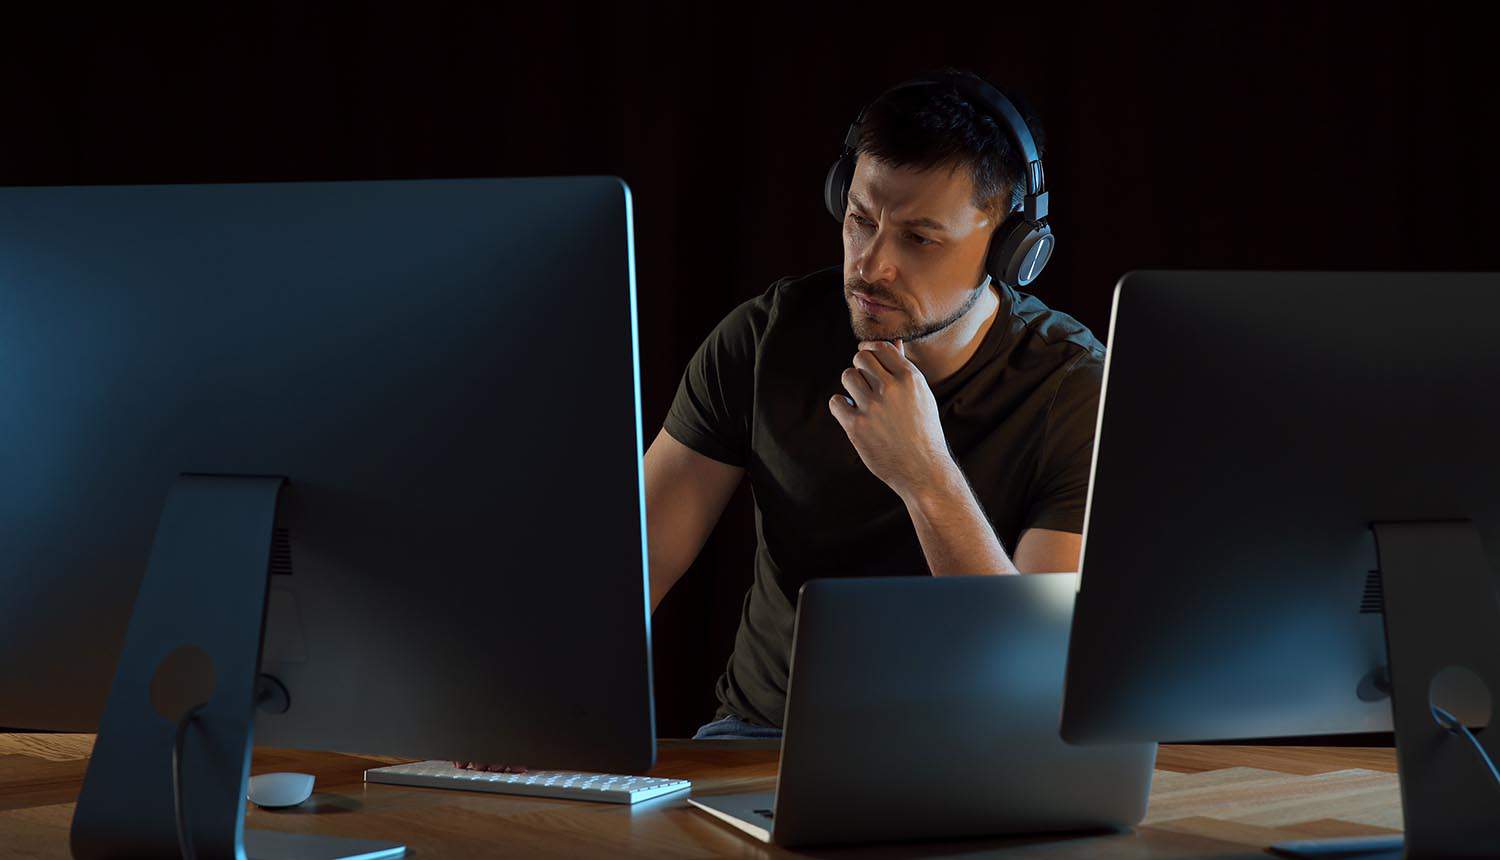 Ethical hacker with headphones working in office at night